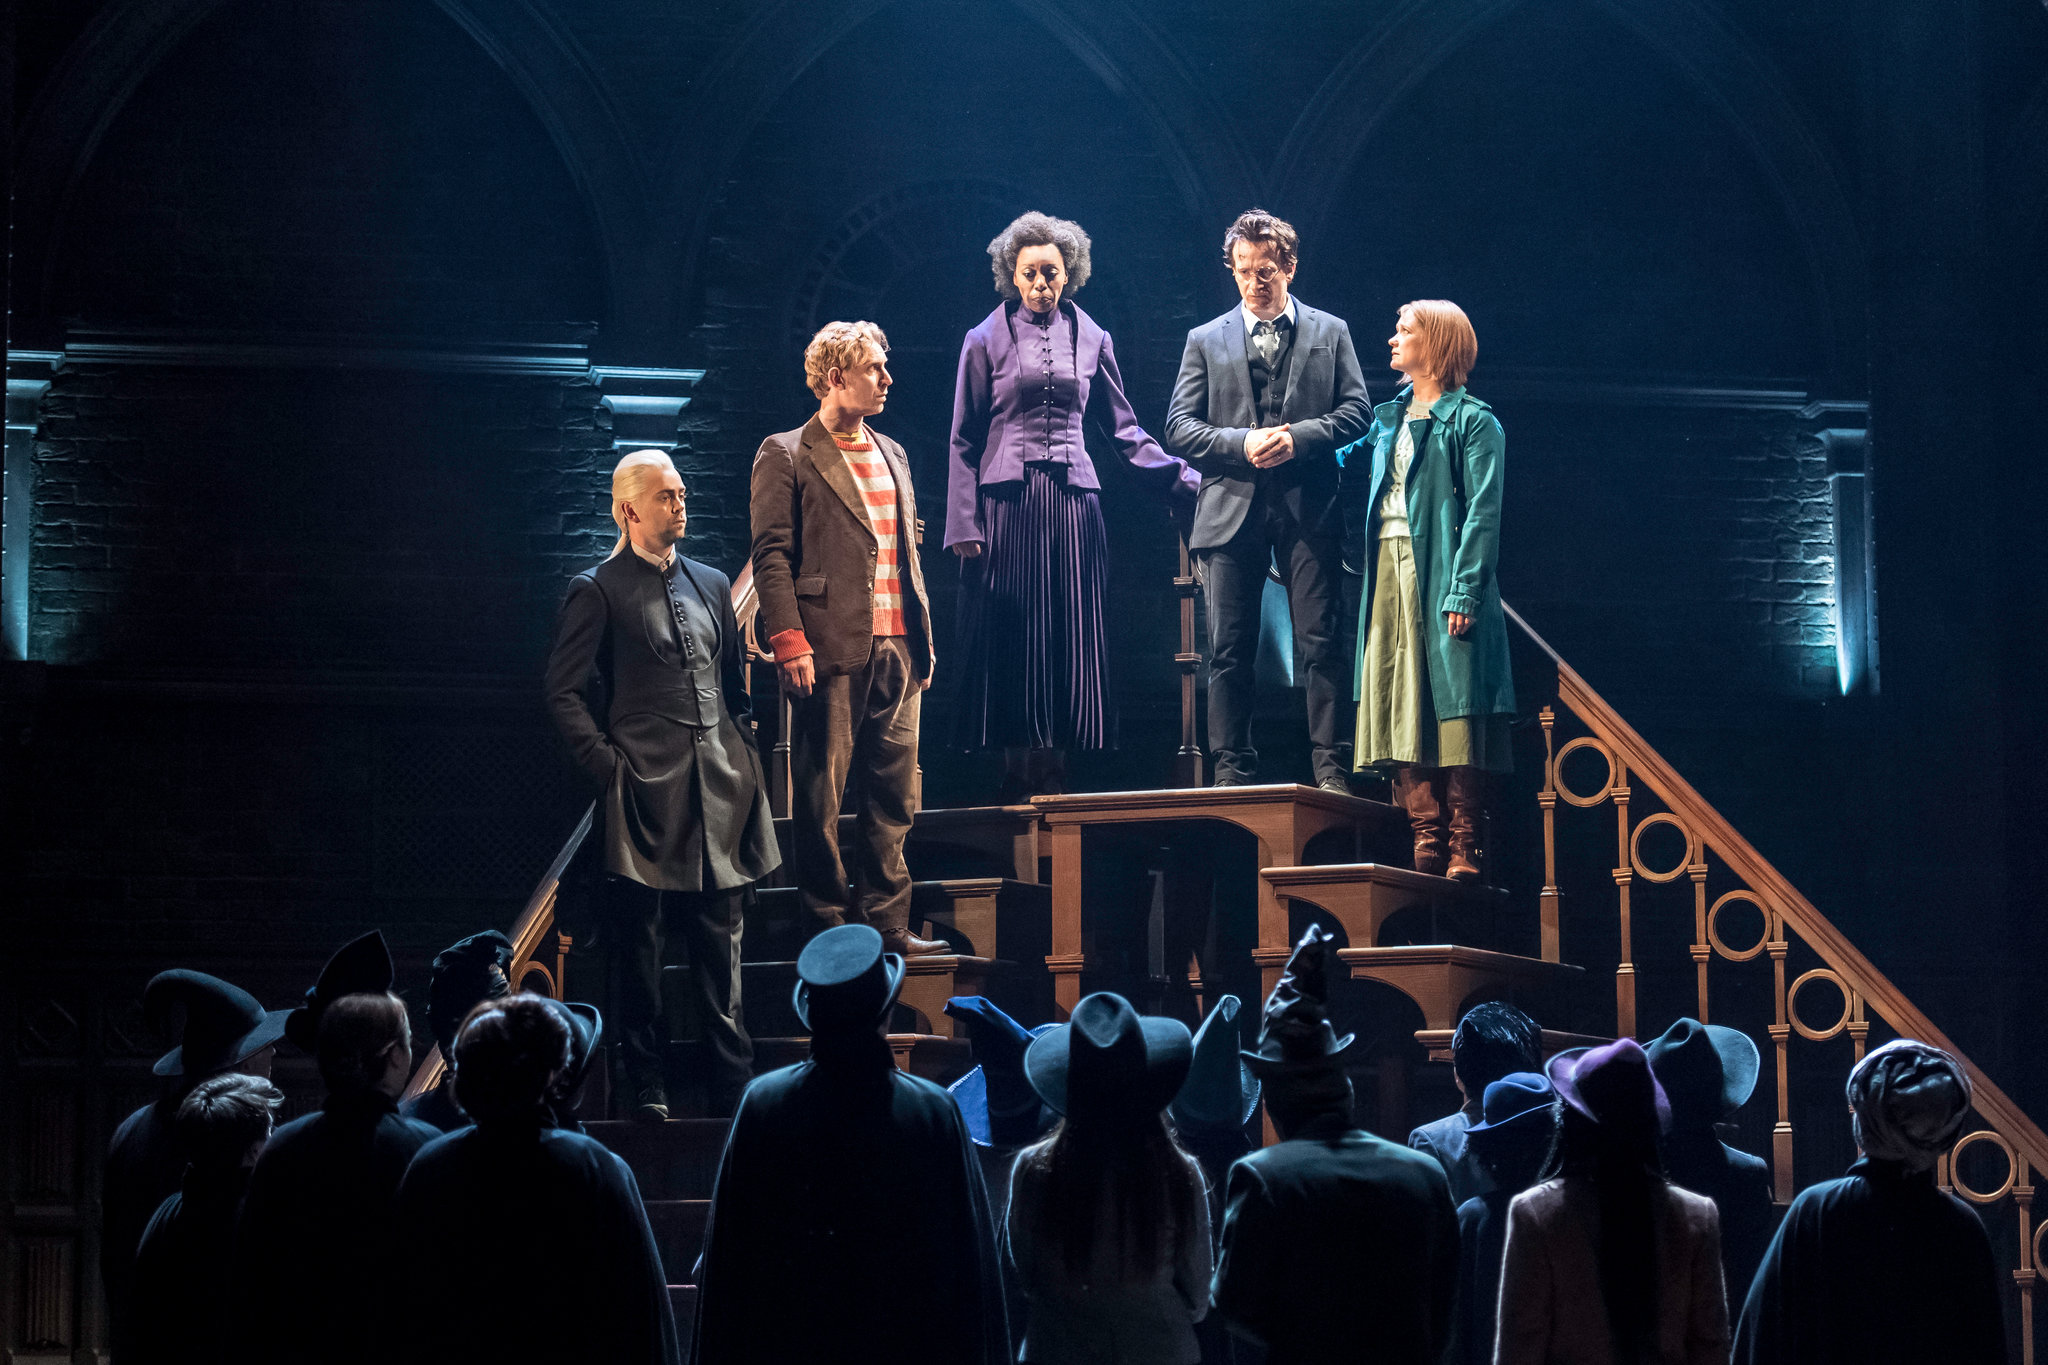 Harry Potter and The Cursed Child - Part 1 & 2 (9/24 7:30PM & 9/25 7:30PM) at Lyric Theatre